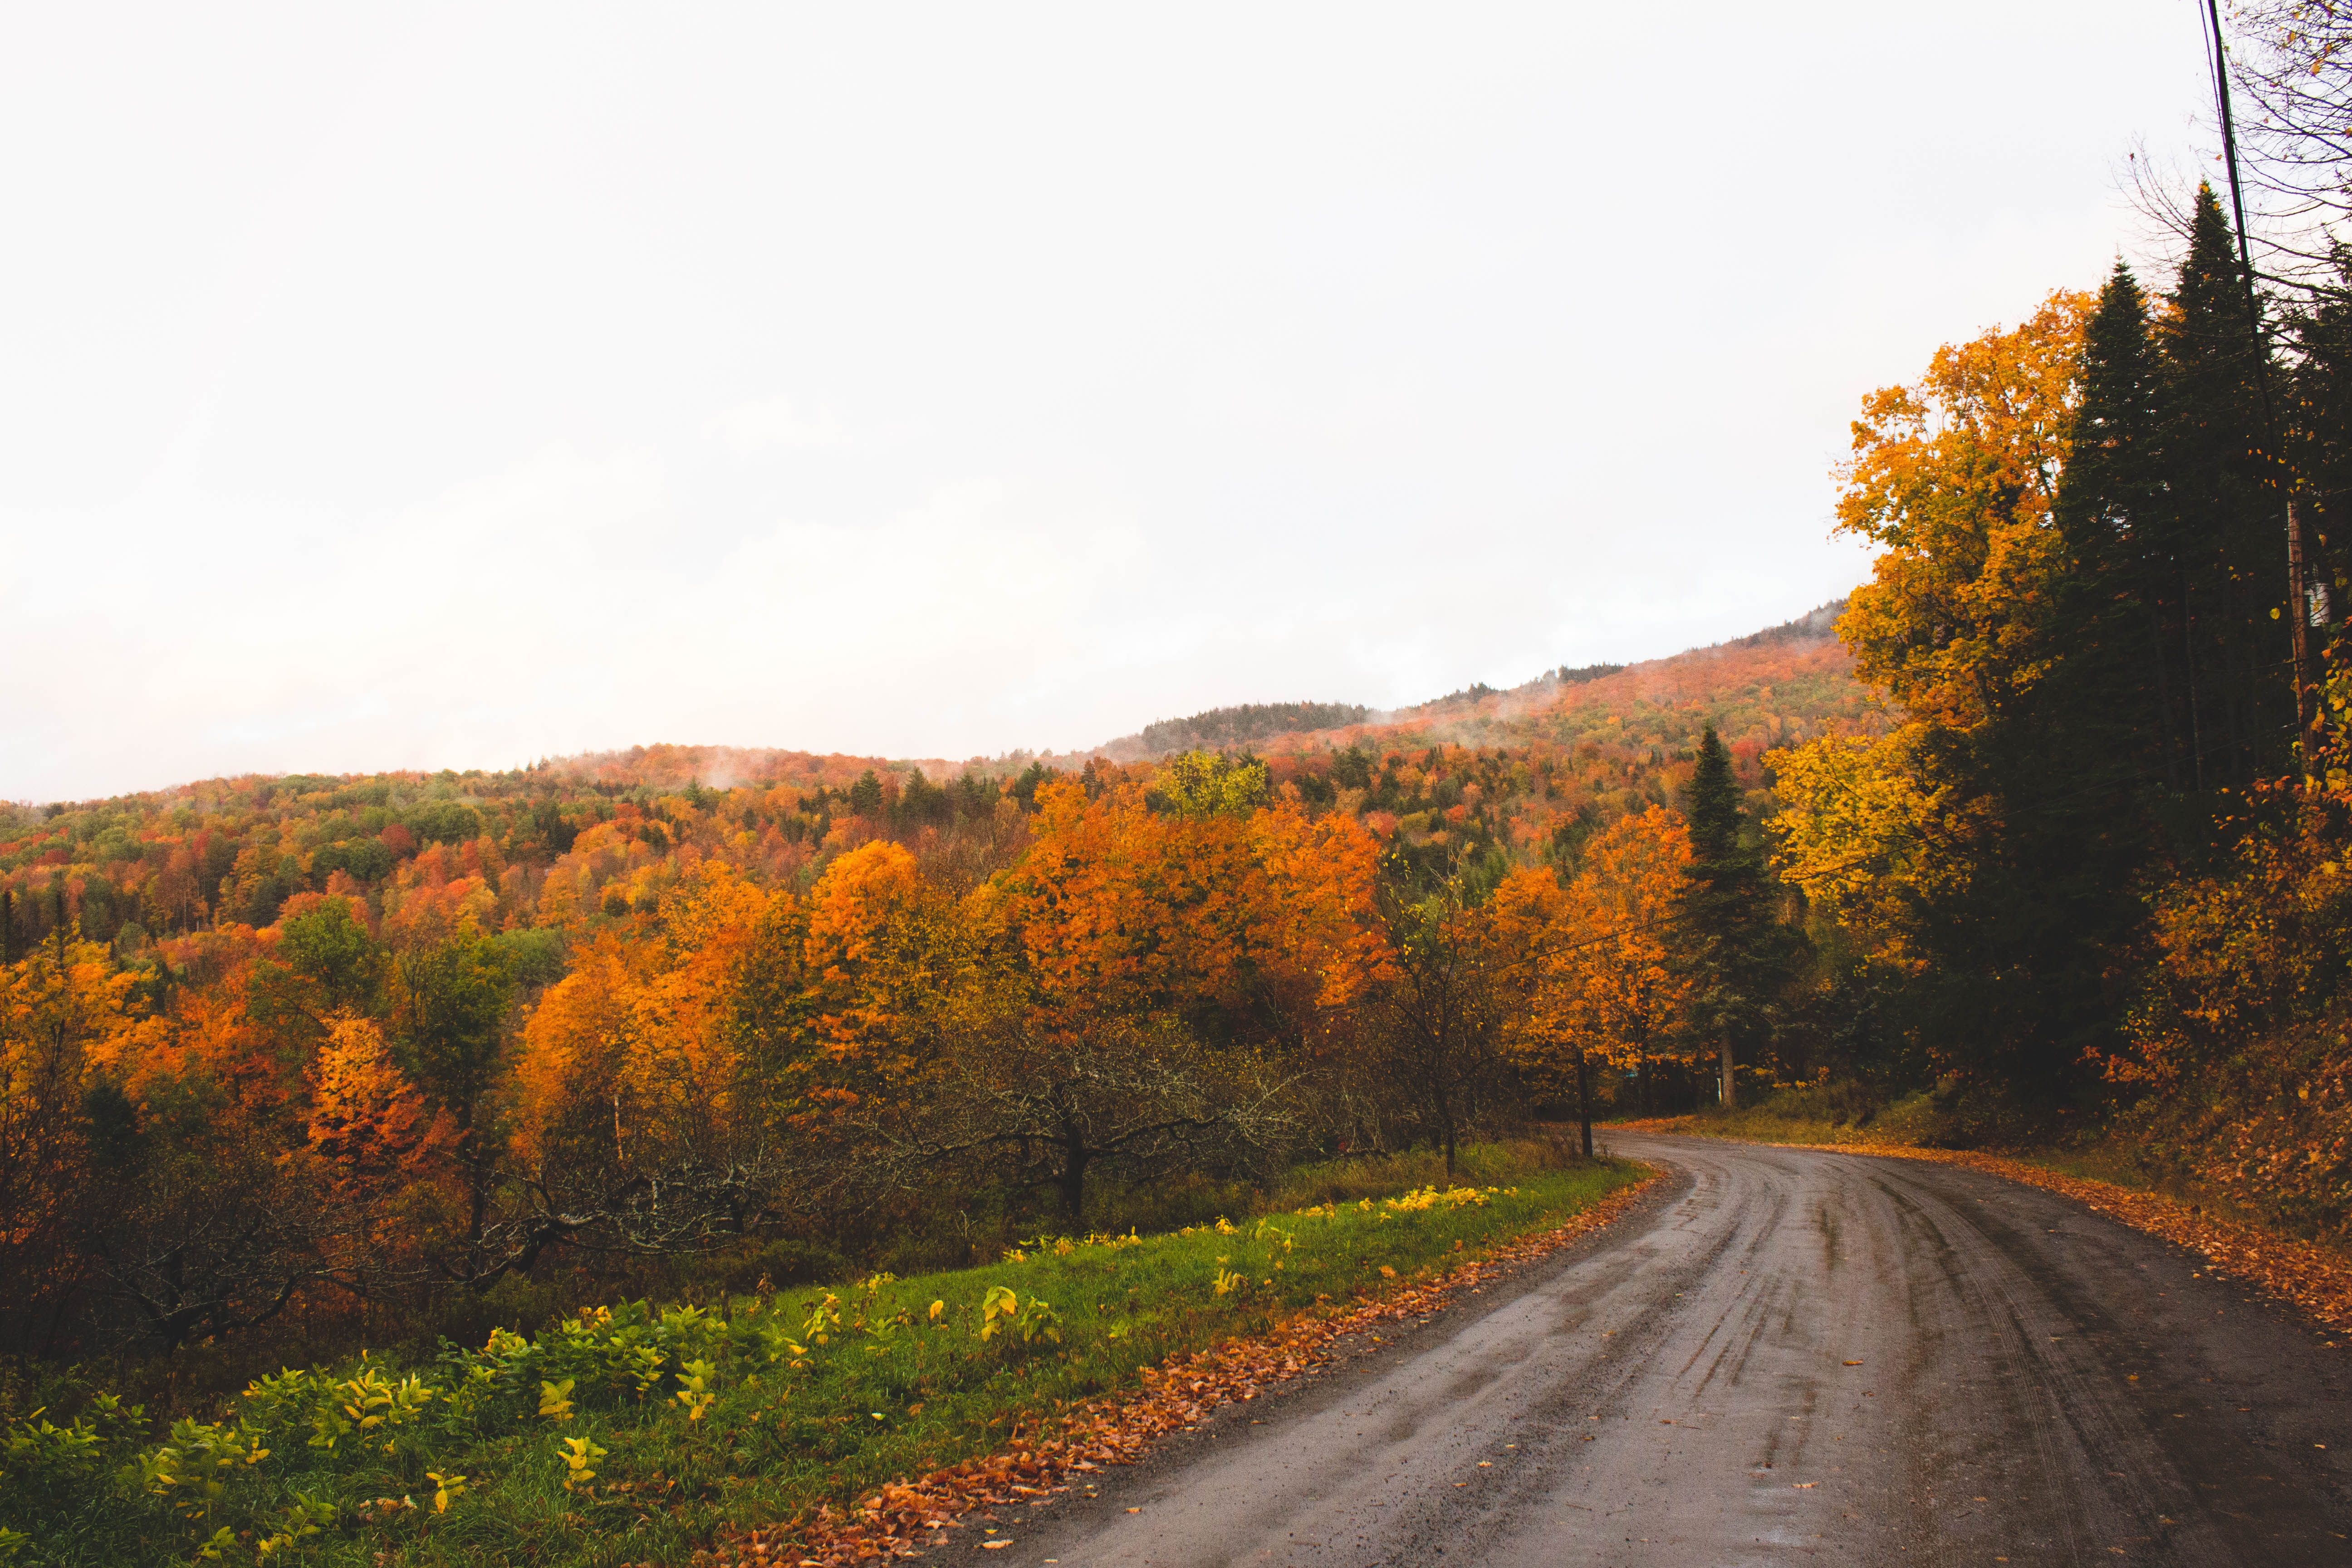 Asphalt road between beautiful fall foliage in Vermont, USA